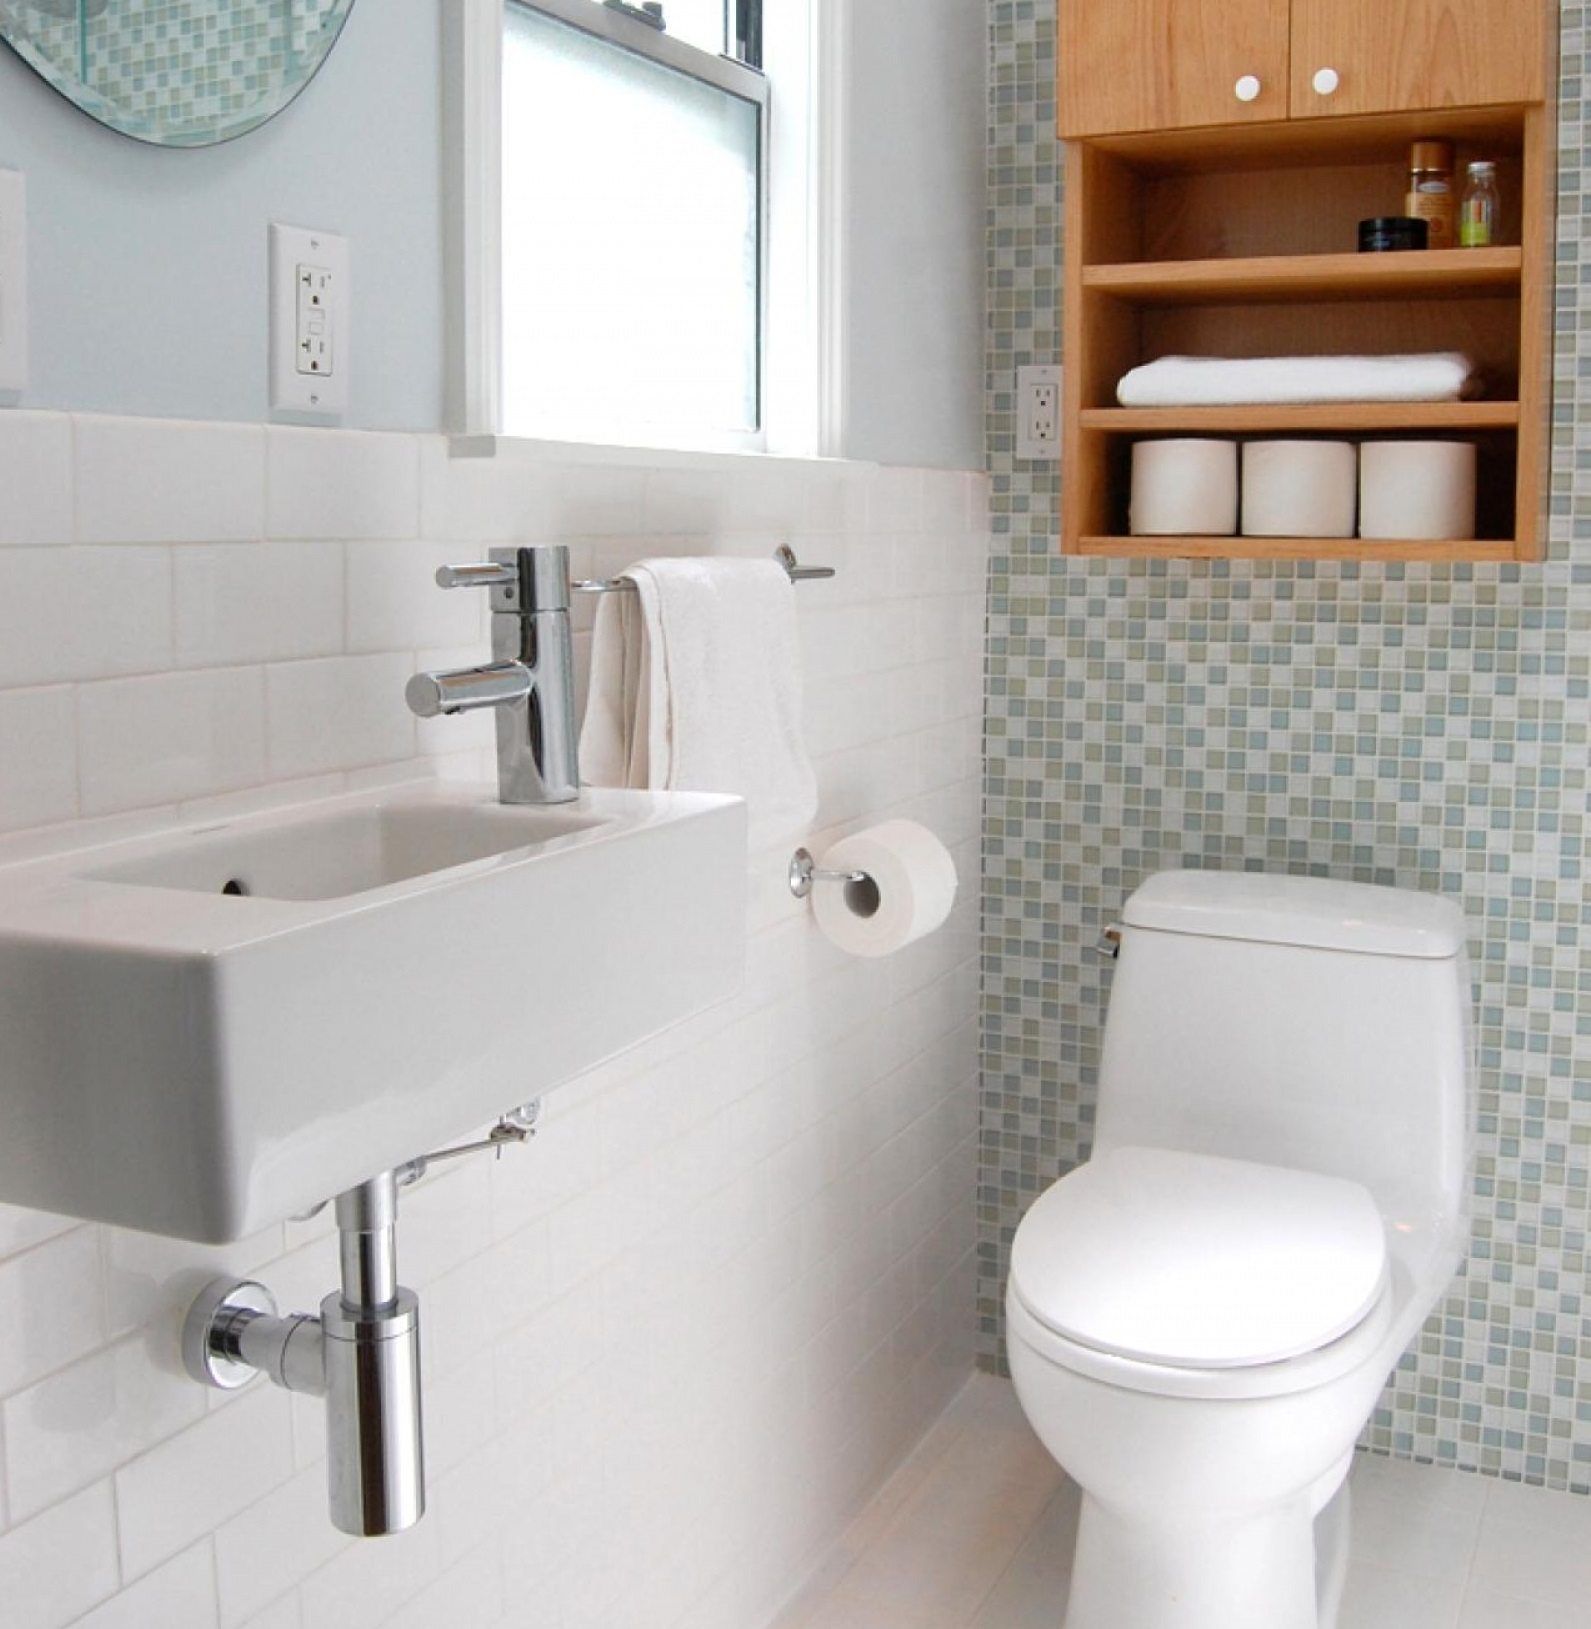 Small size toilet design: photos and tips